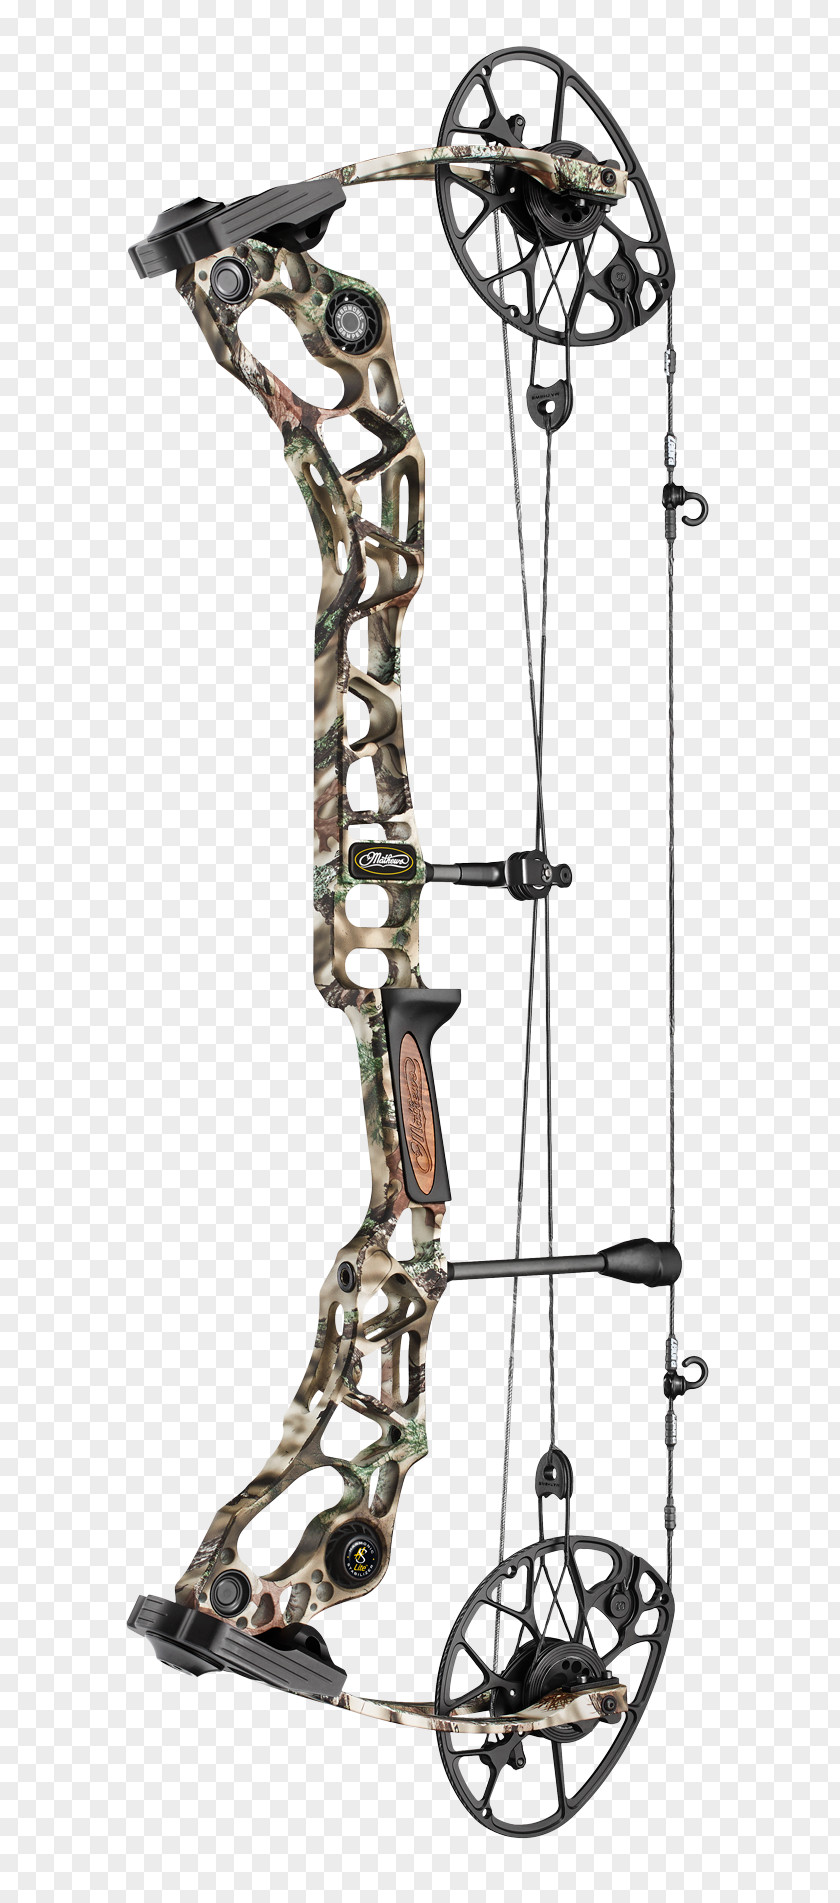 Bow Arrow Mathews Archery, Inc. Compound Bows And Hunting PNG